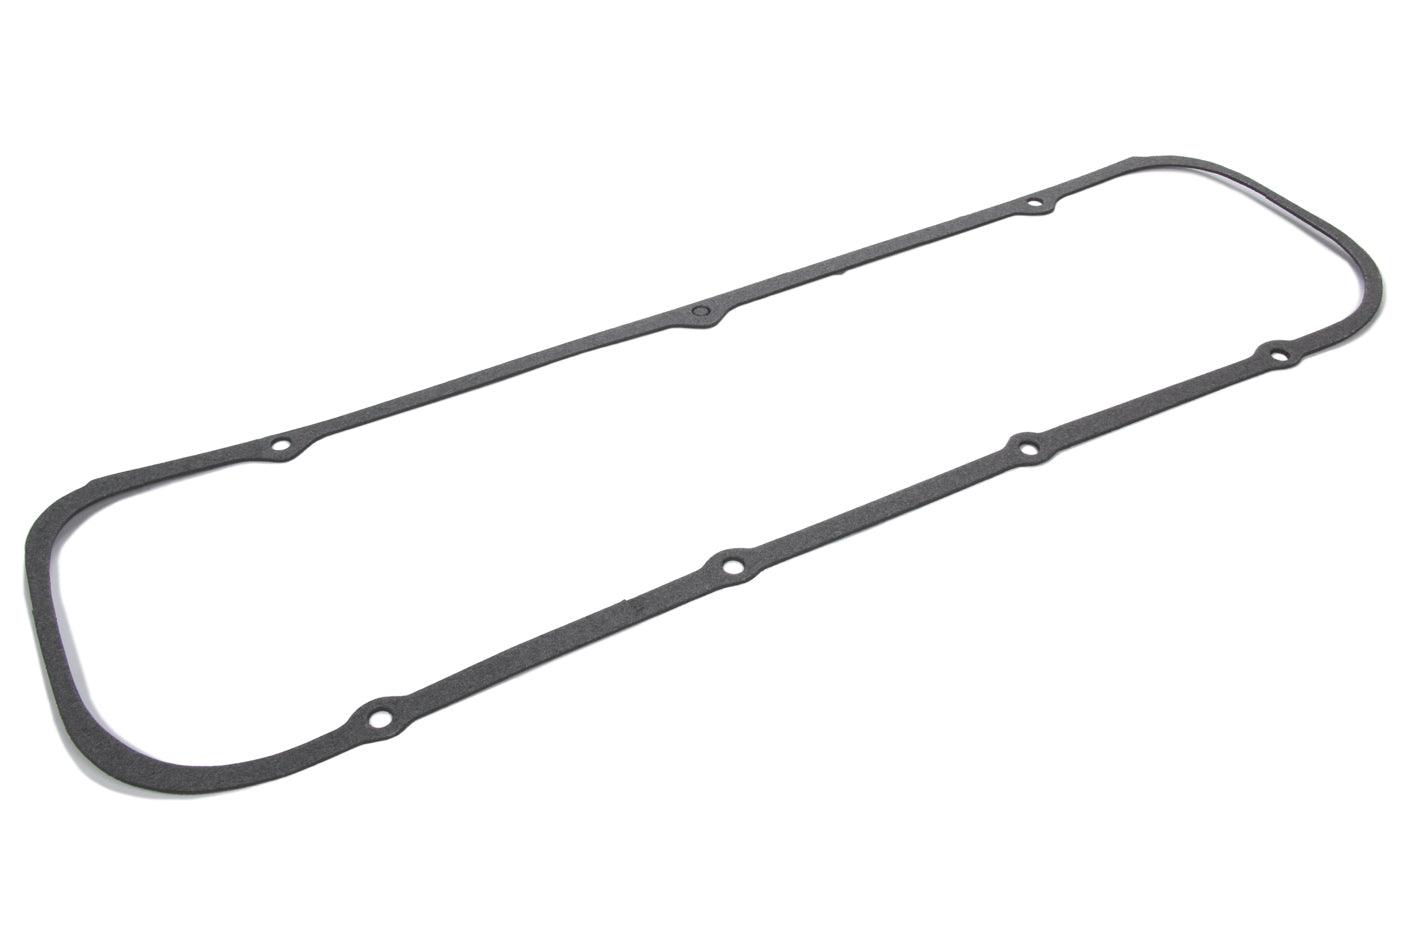 Valve Cover Gasket - BBC (Each) - Burlile Performance Products